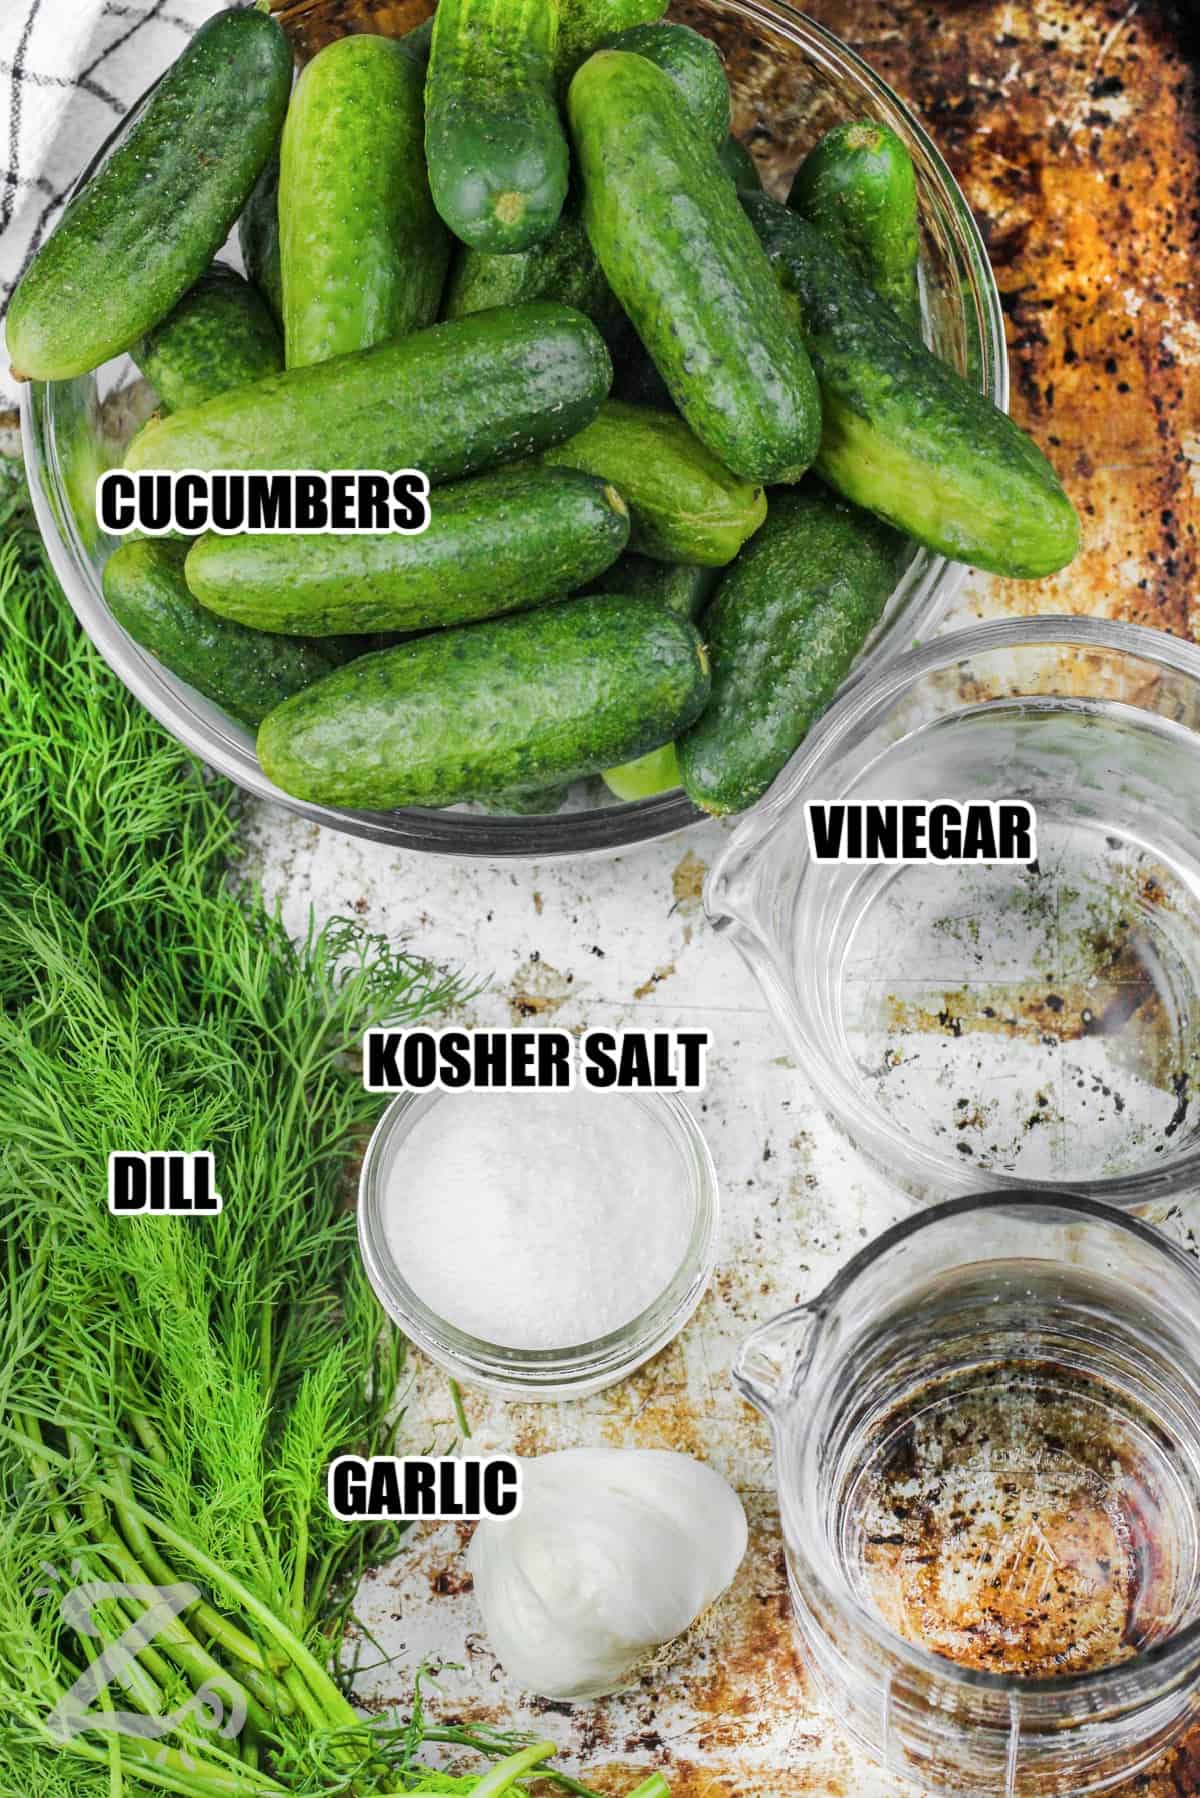 ingredients to make dill pickles labeled: cucumbers, vinegar, kosher salt, garlic and dill